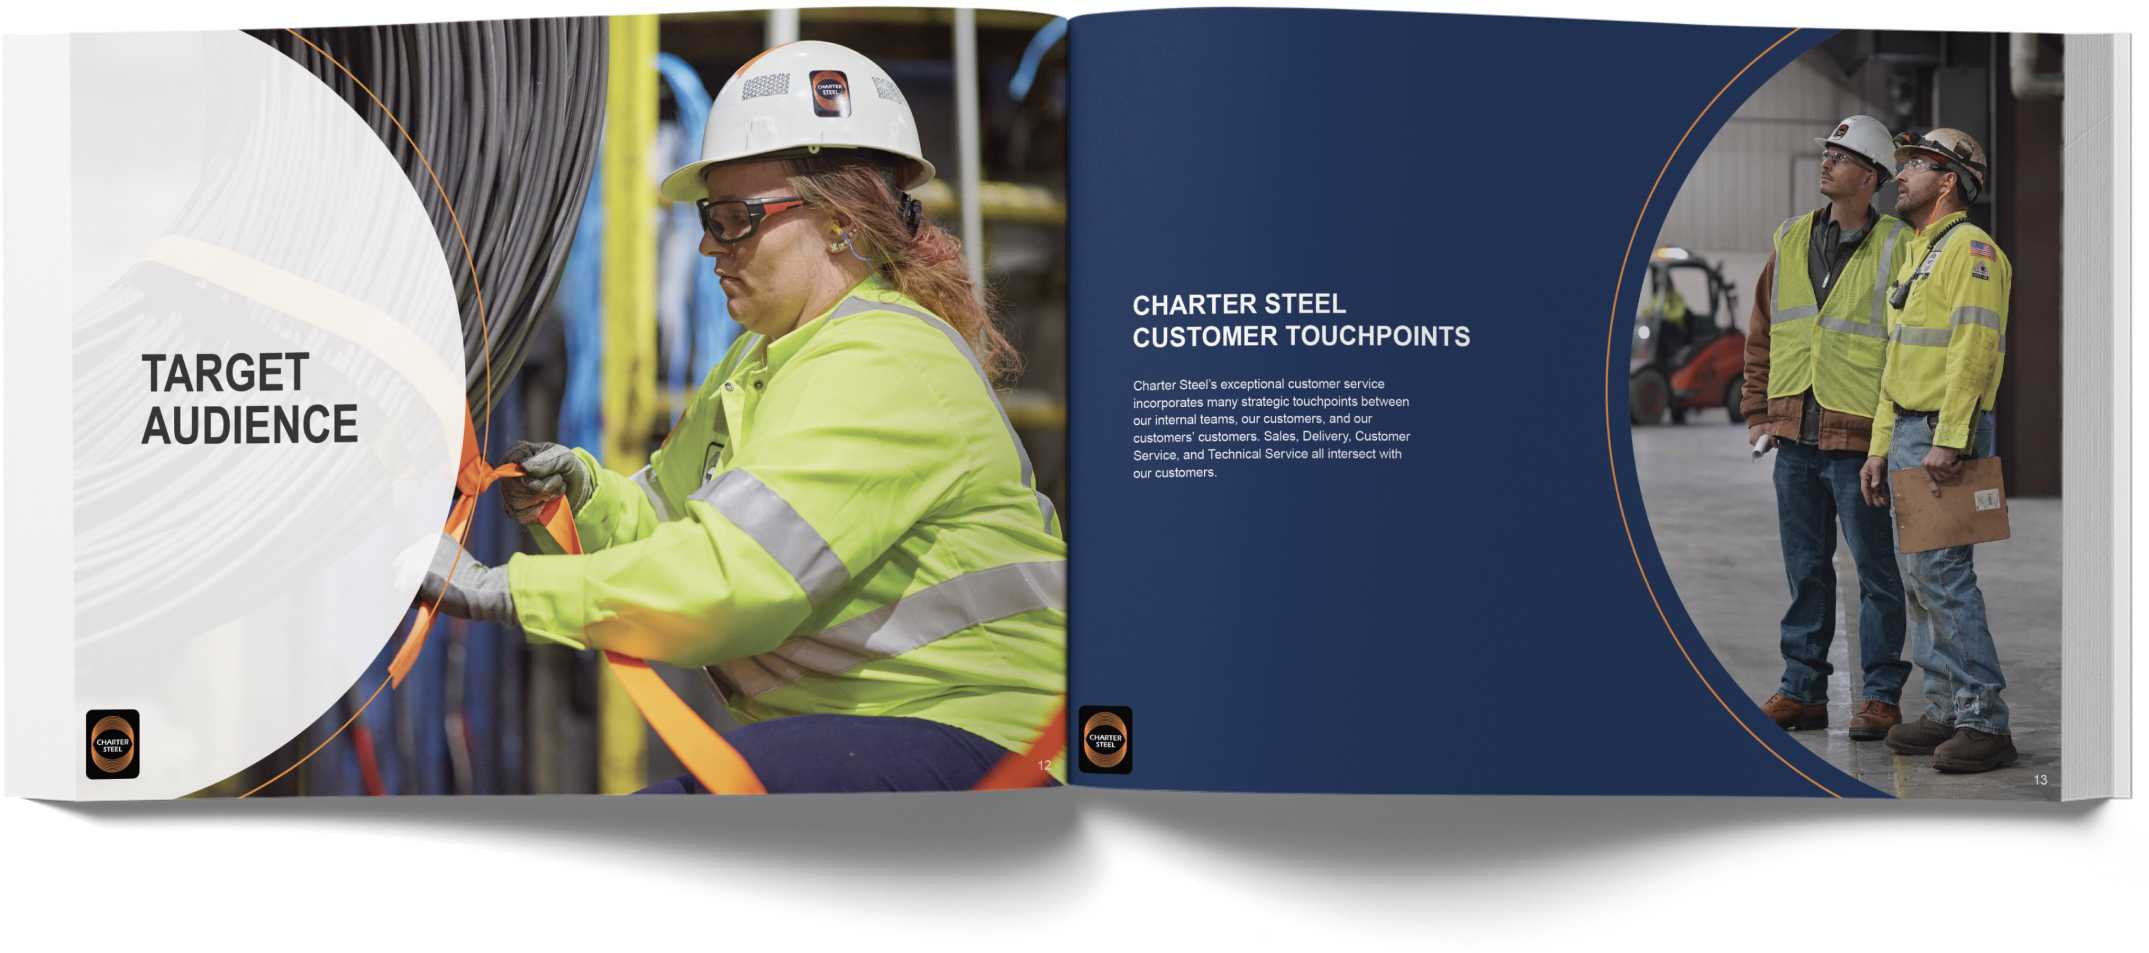 Charter Steel Brand Playbook by Element